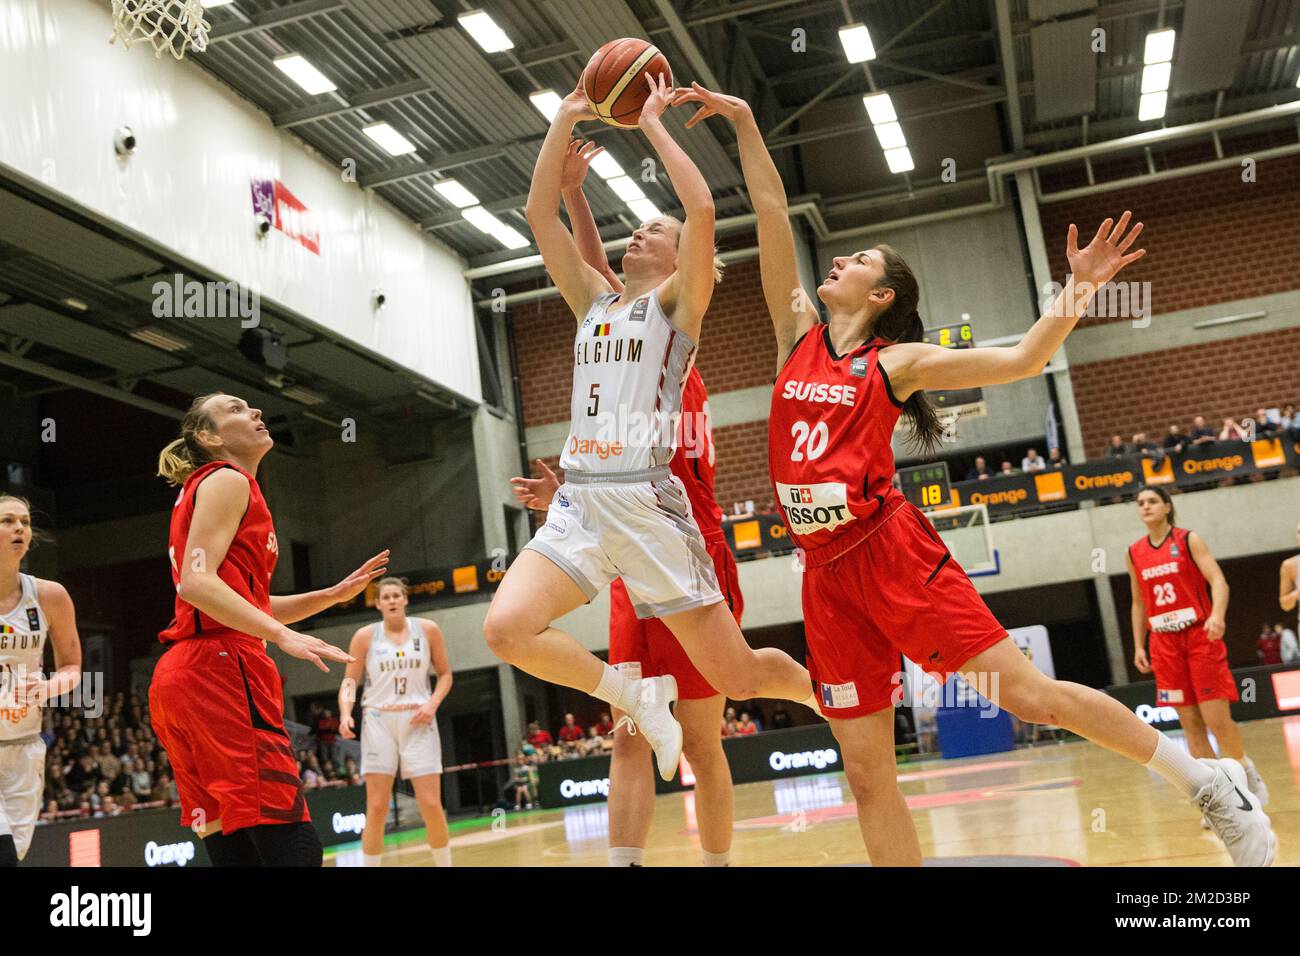 Swiss Meline Franchina and Belgian Cats Antonia Delaere fight for the ball  during the Euro 2019 qualification match between the Belgian Cats,  Belgium's women national basketball team, and Switzerland, on Wednesday 14